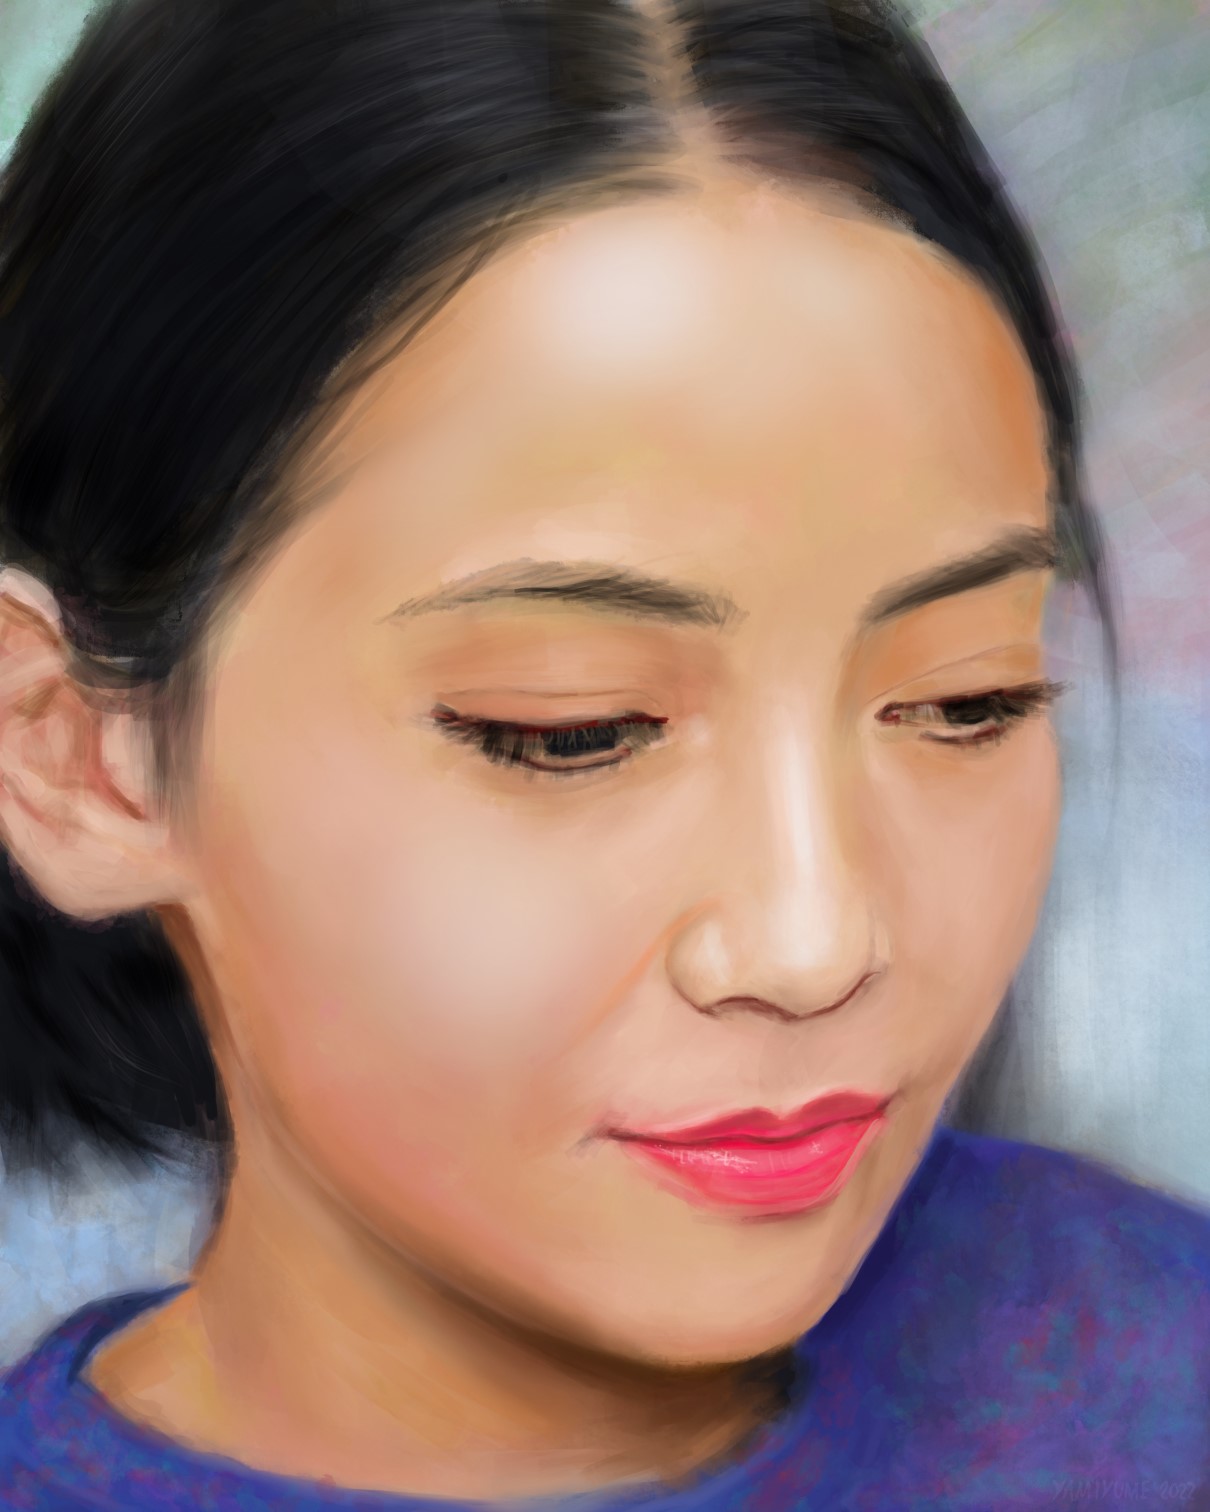 Digitally painted portrait of an Asian woman looking absentminded at nothing in particular, likely daydreaming.